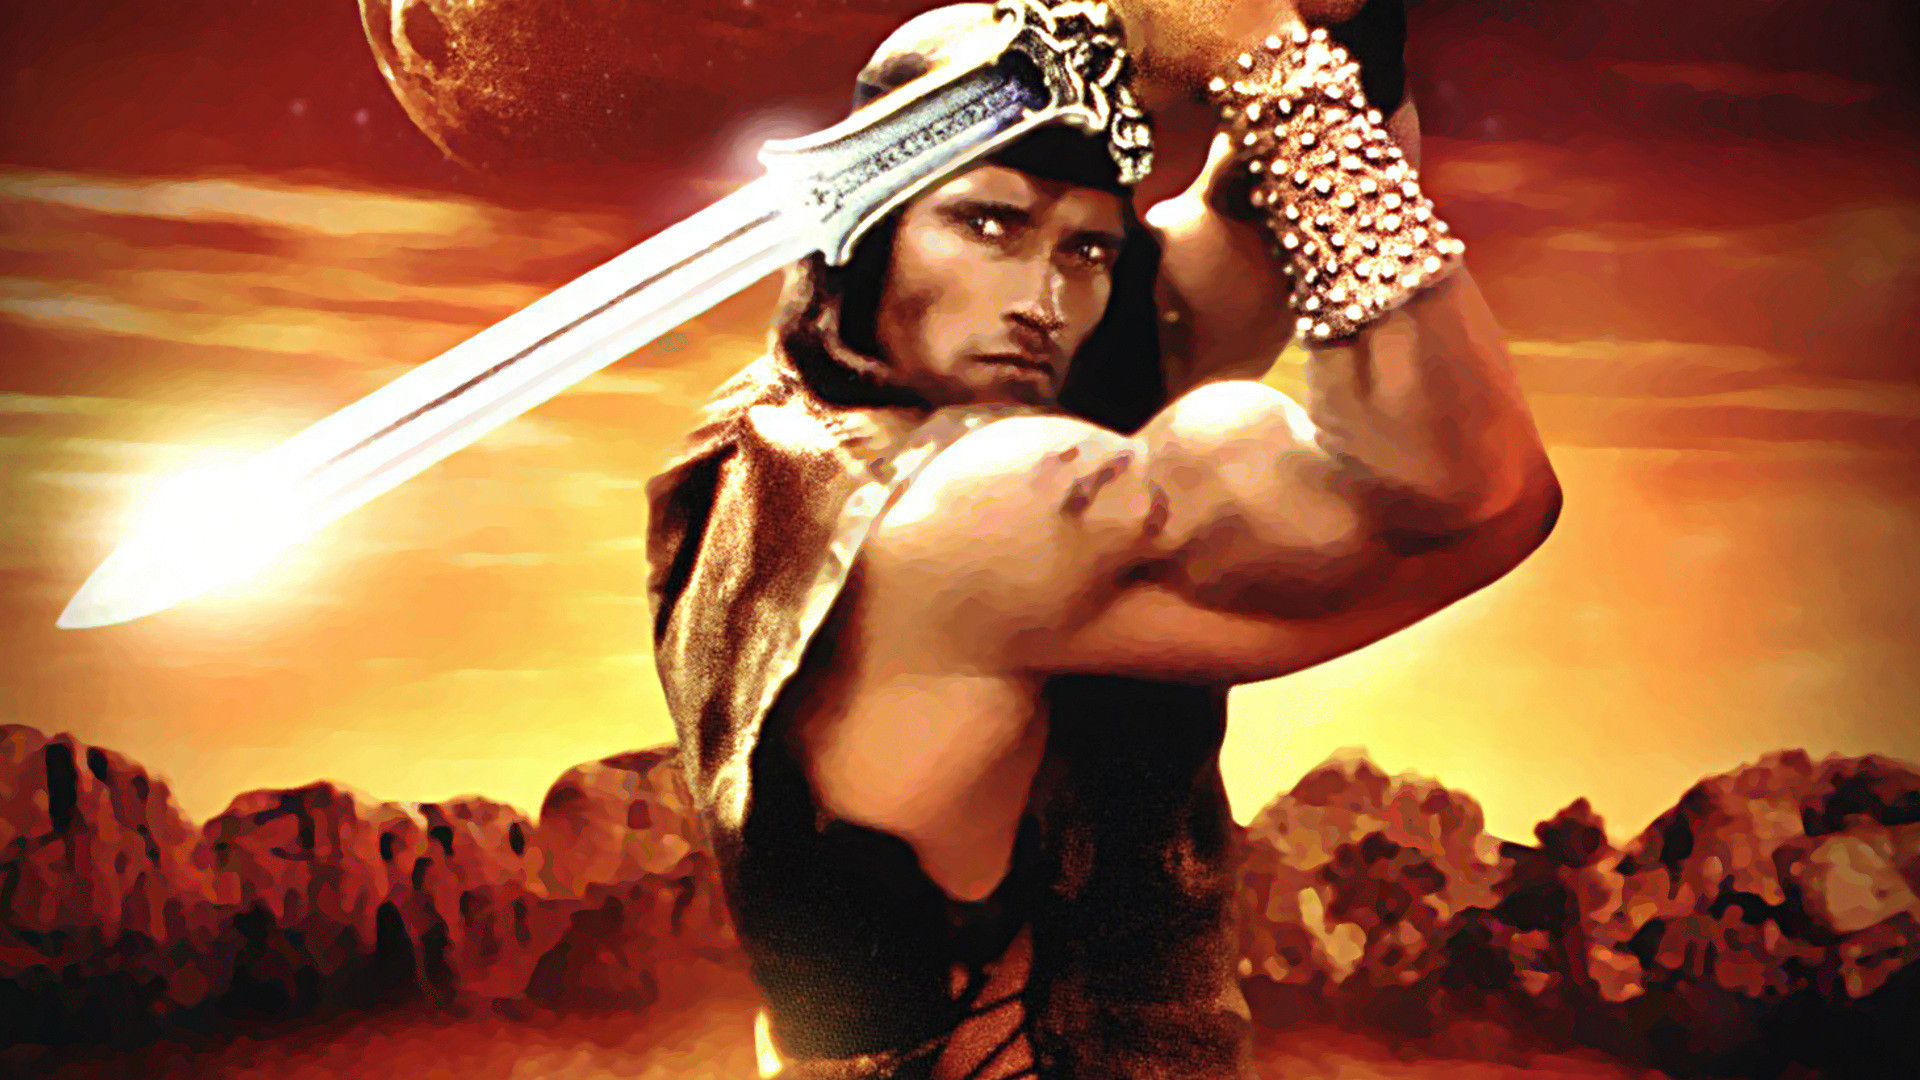 1400x1050  conan the barbarian  Full HD Wallpaper Photo   Coolwallpapersme